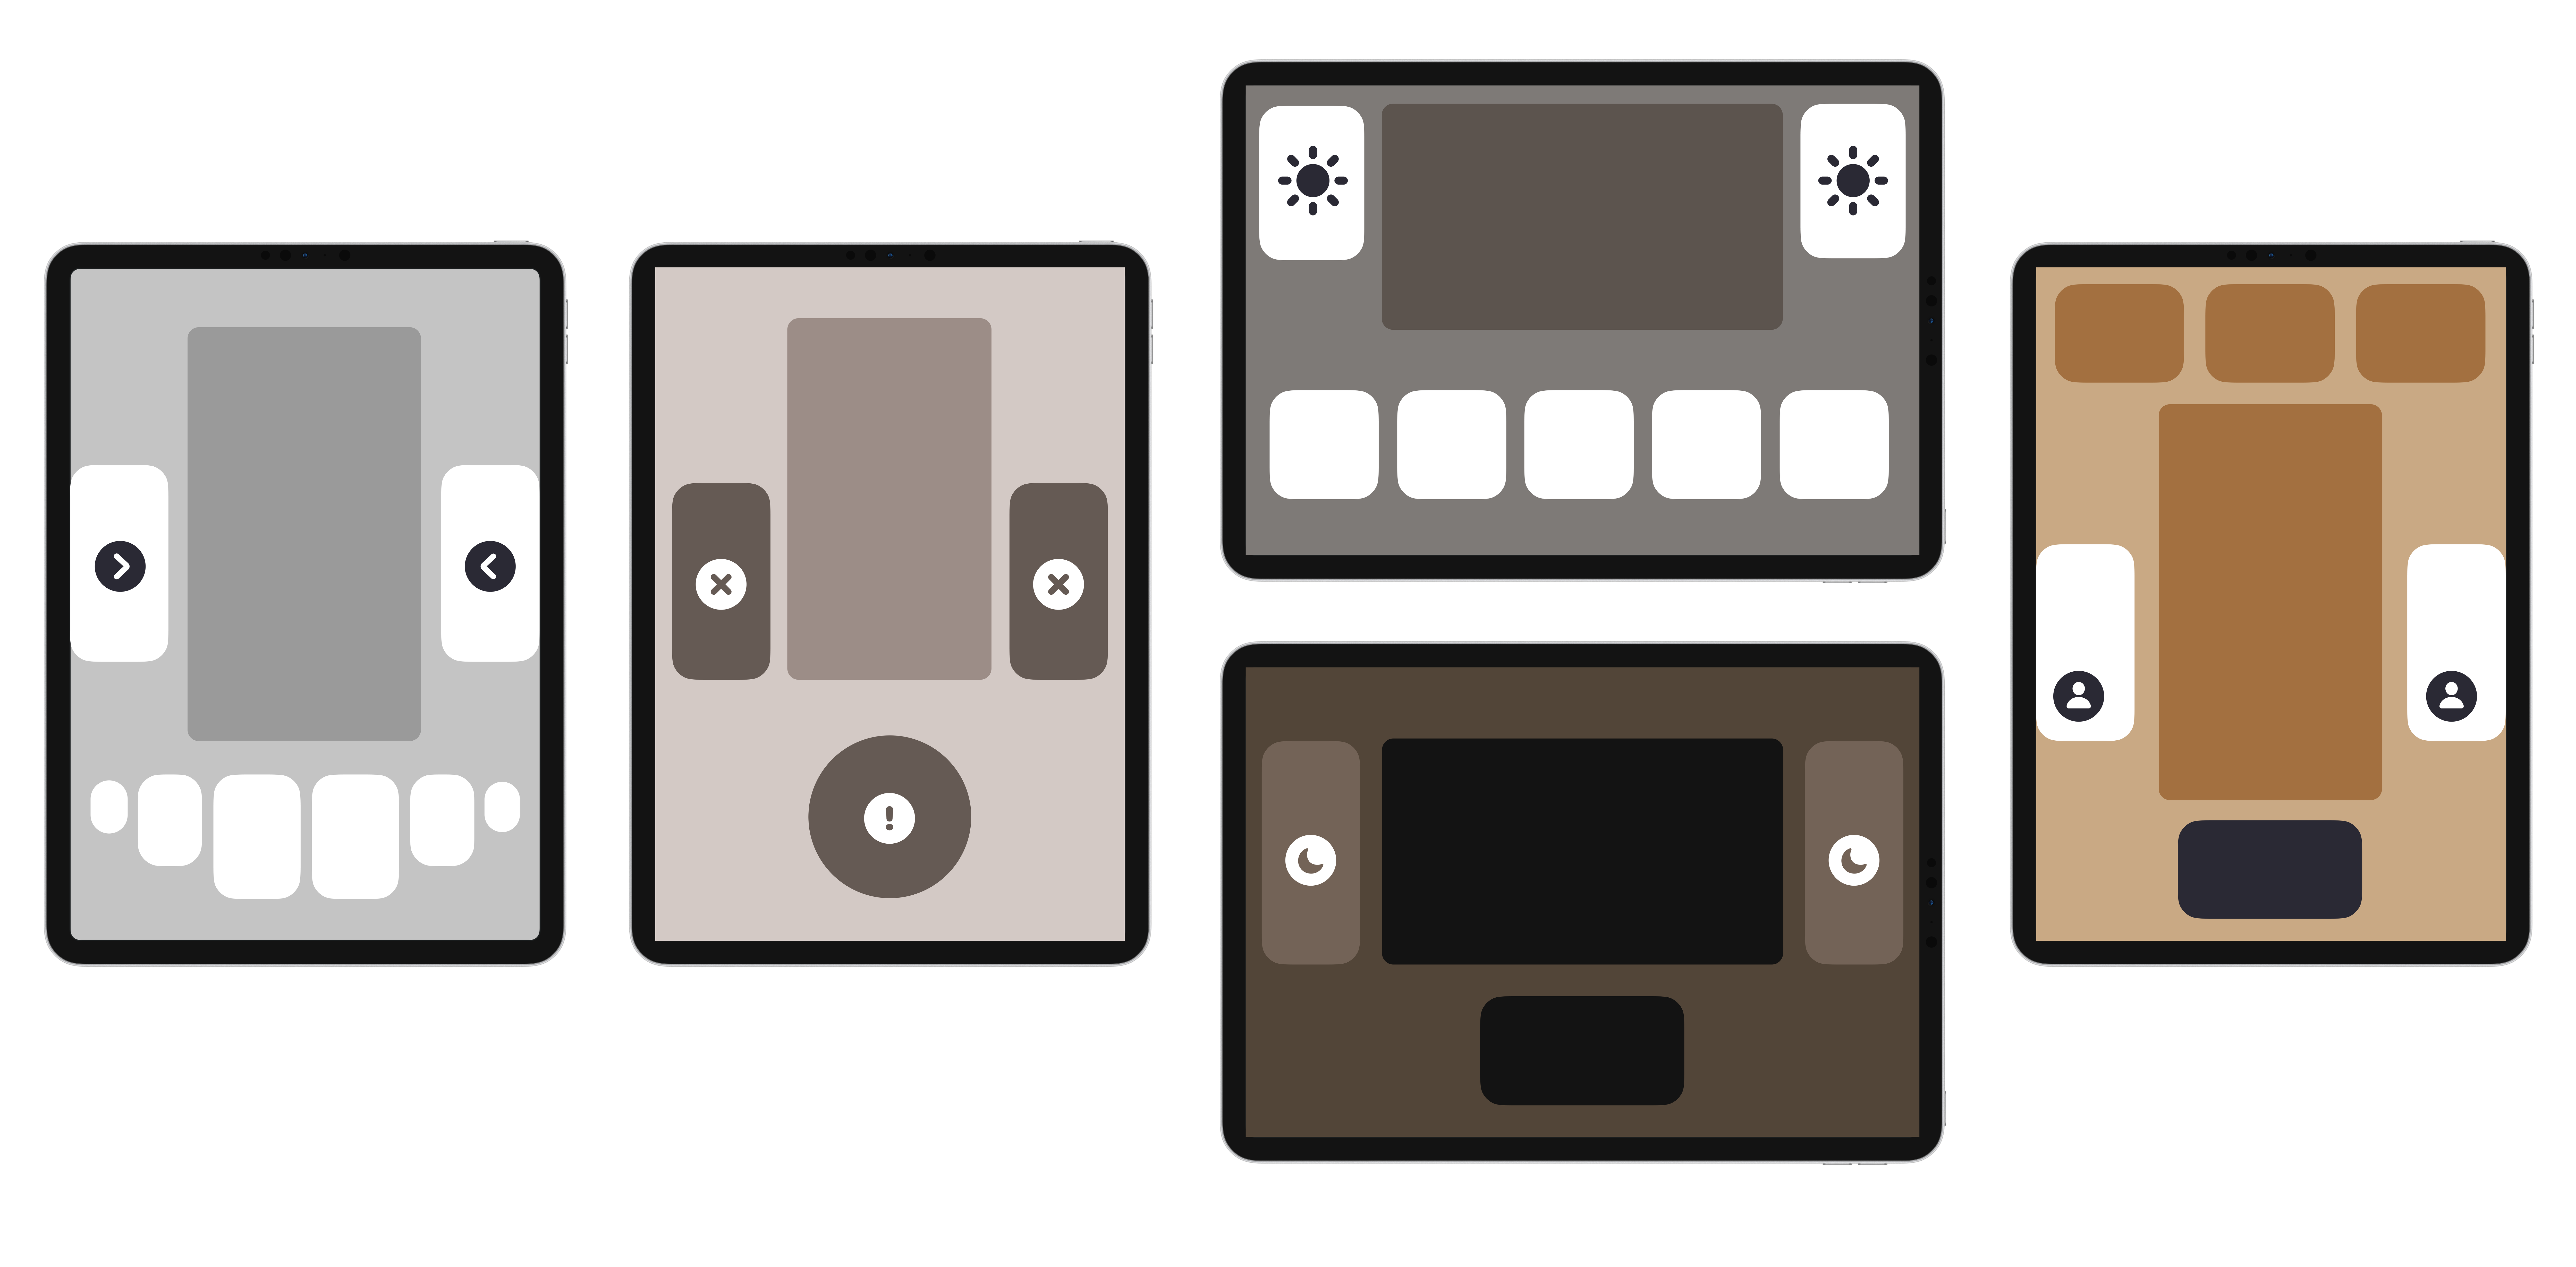 Five abstact configurations of the Tap Assist UI that look like animal faces